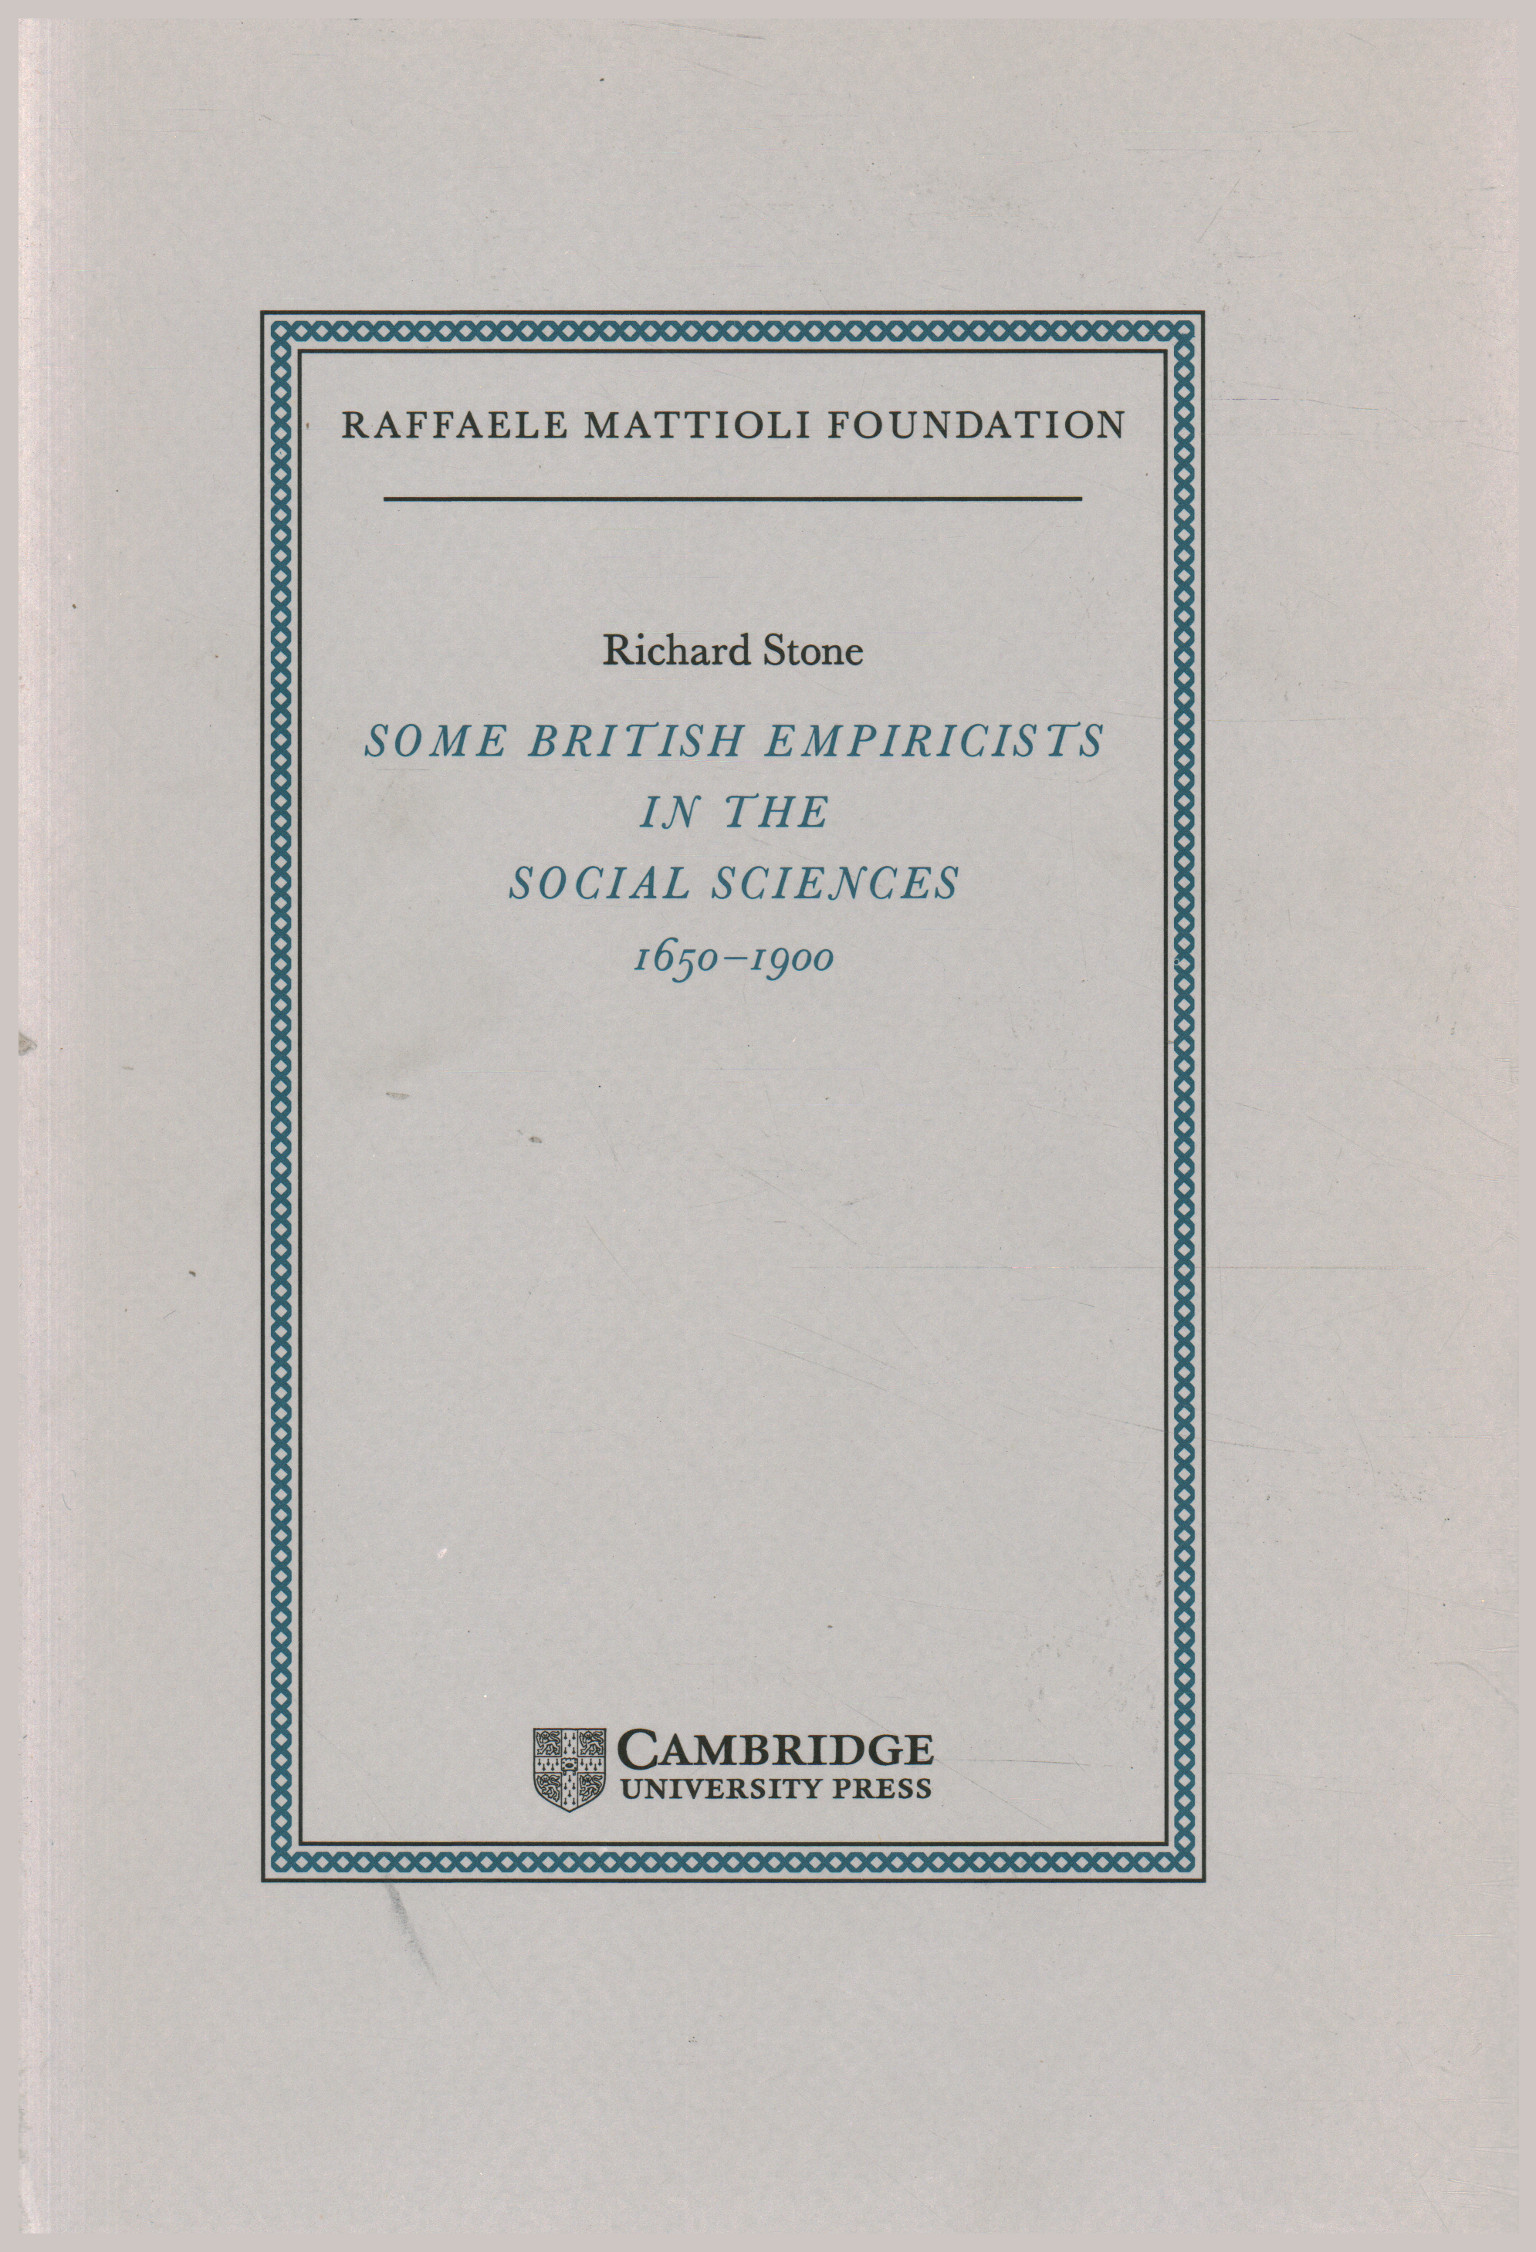 Some british empiricists in the social sciences, Richard Stone